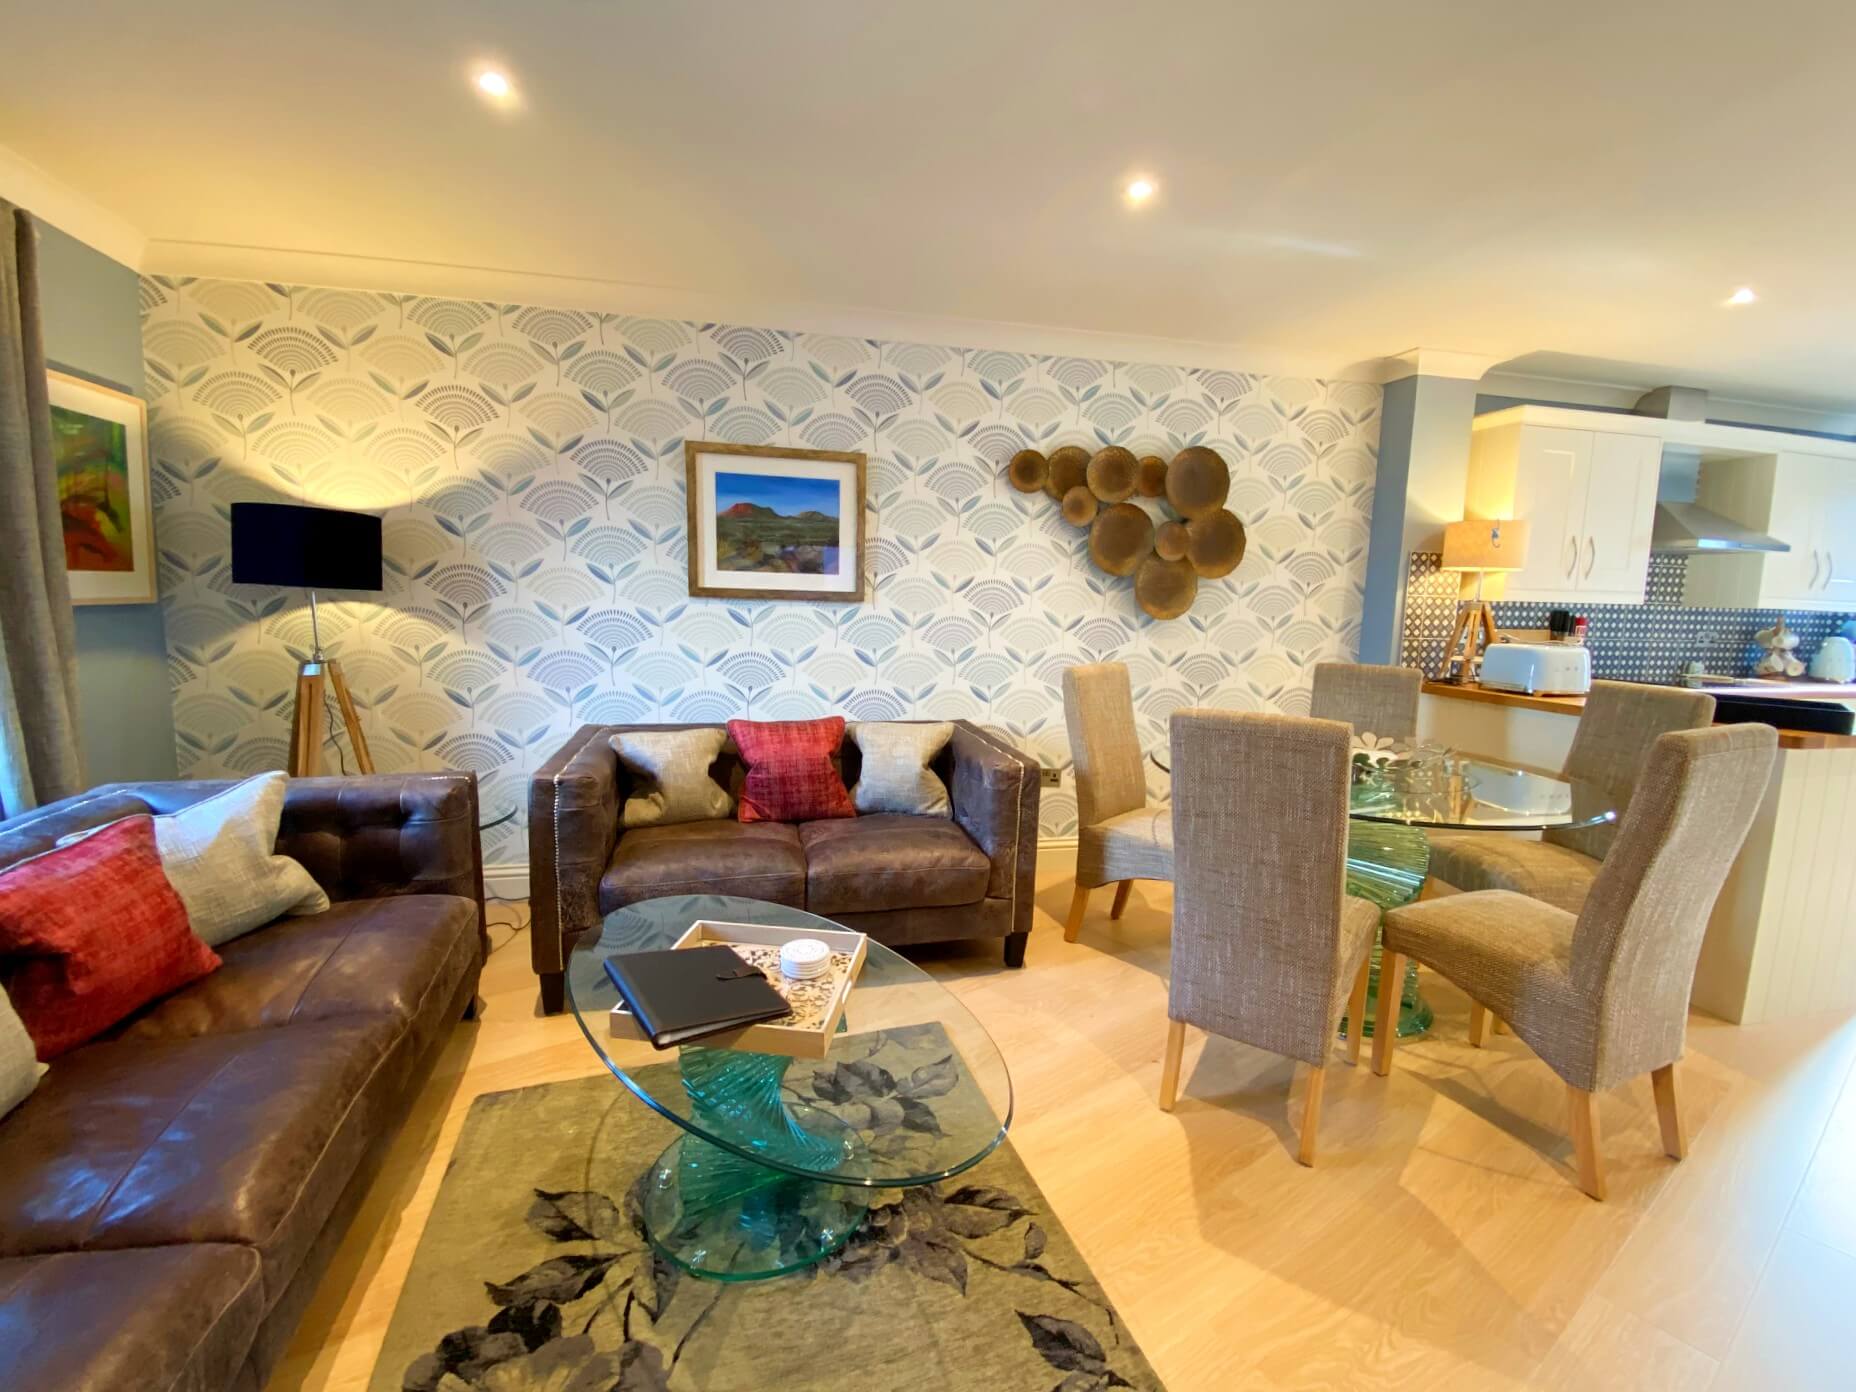 Lisburne Place Luxury Town House Self Catering Accommodation - open plan living area.